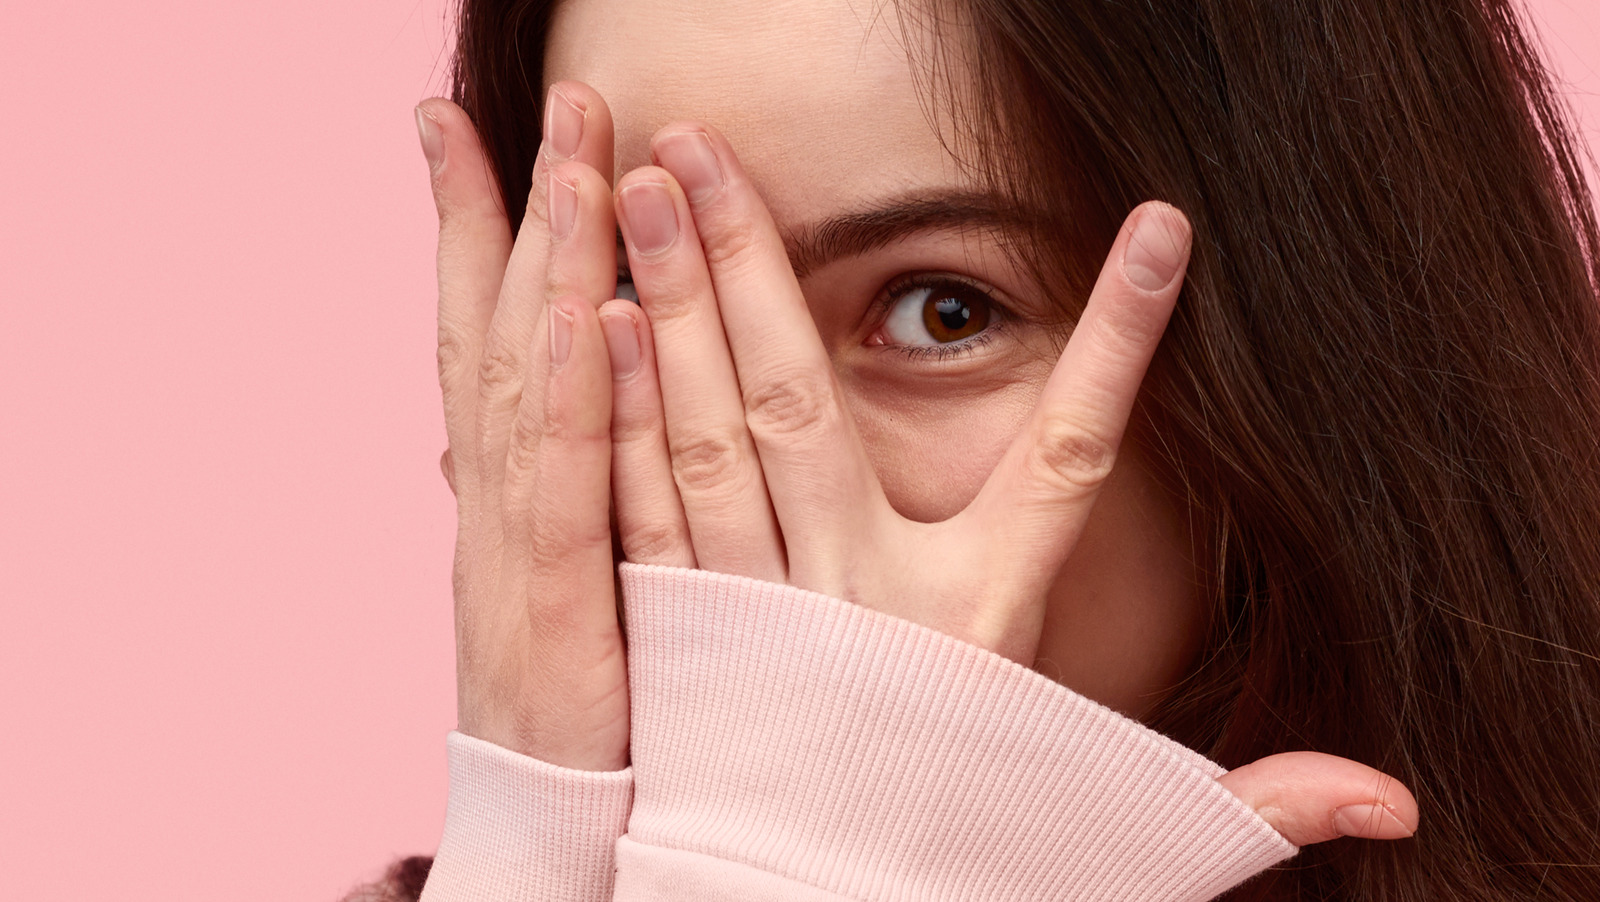 Why we blush, and how to feel better about blushing.